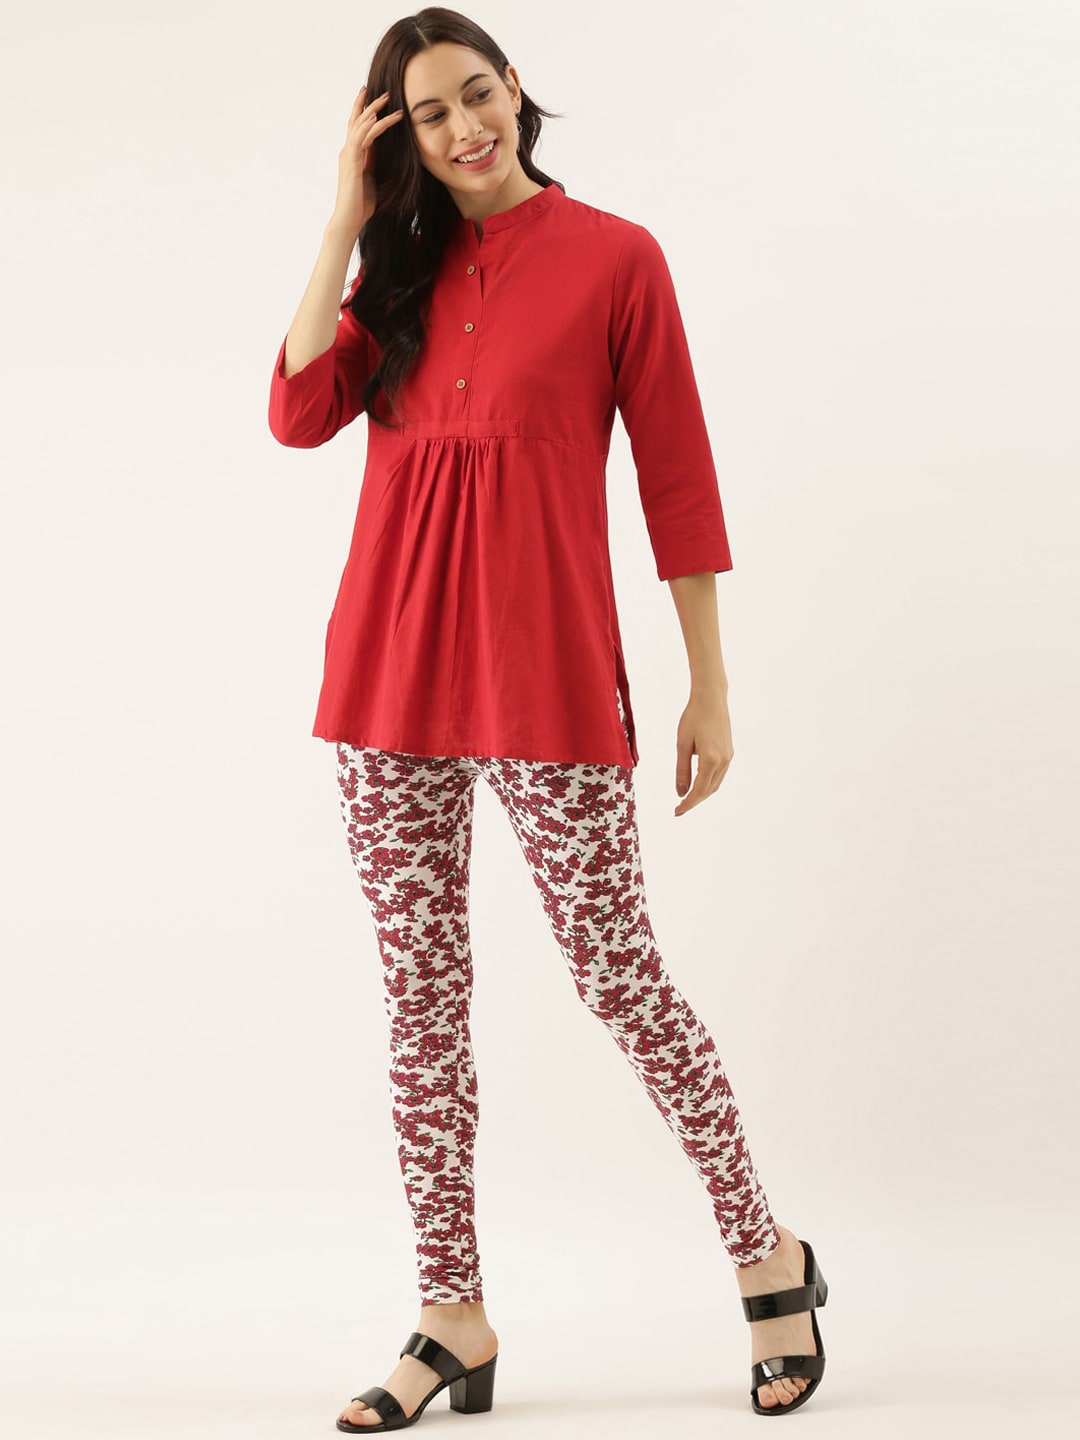 Souchii White & Red Printed Slim-Fit Ankle-Length Leggings